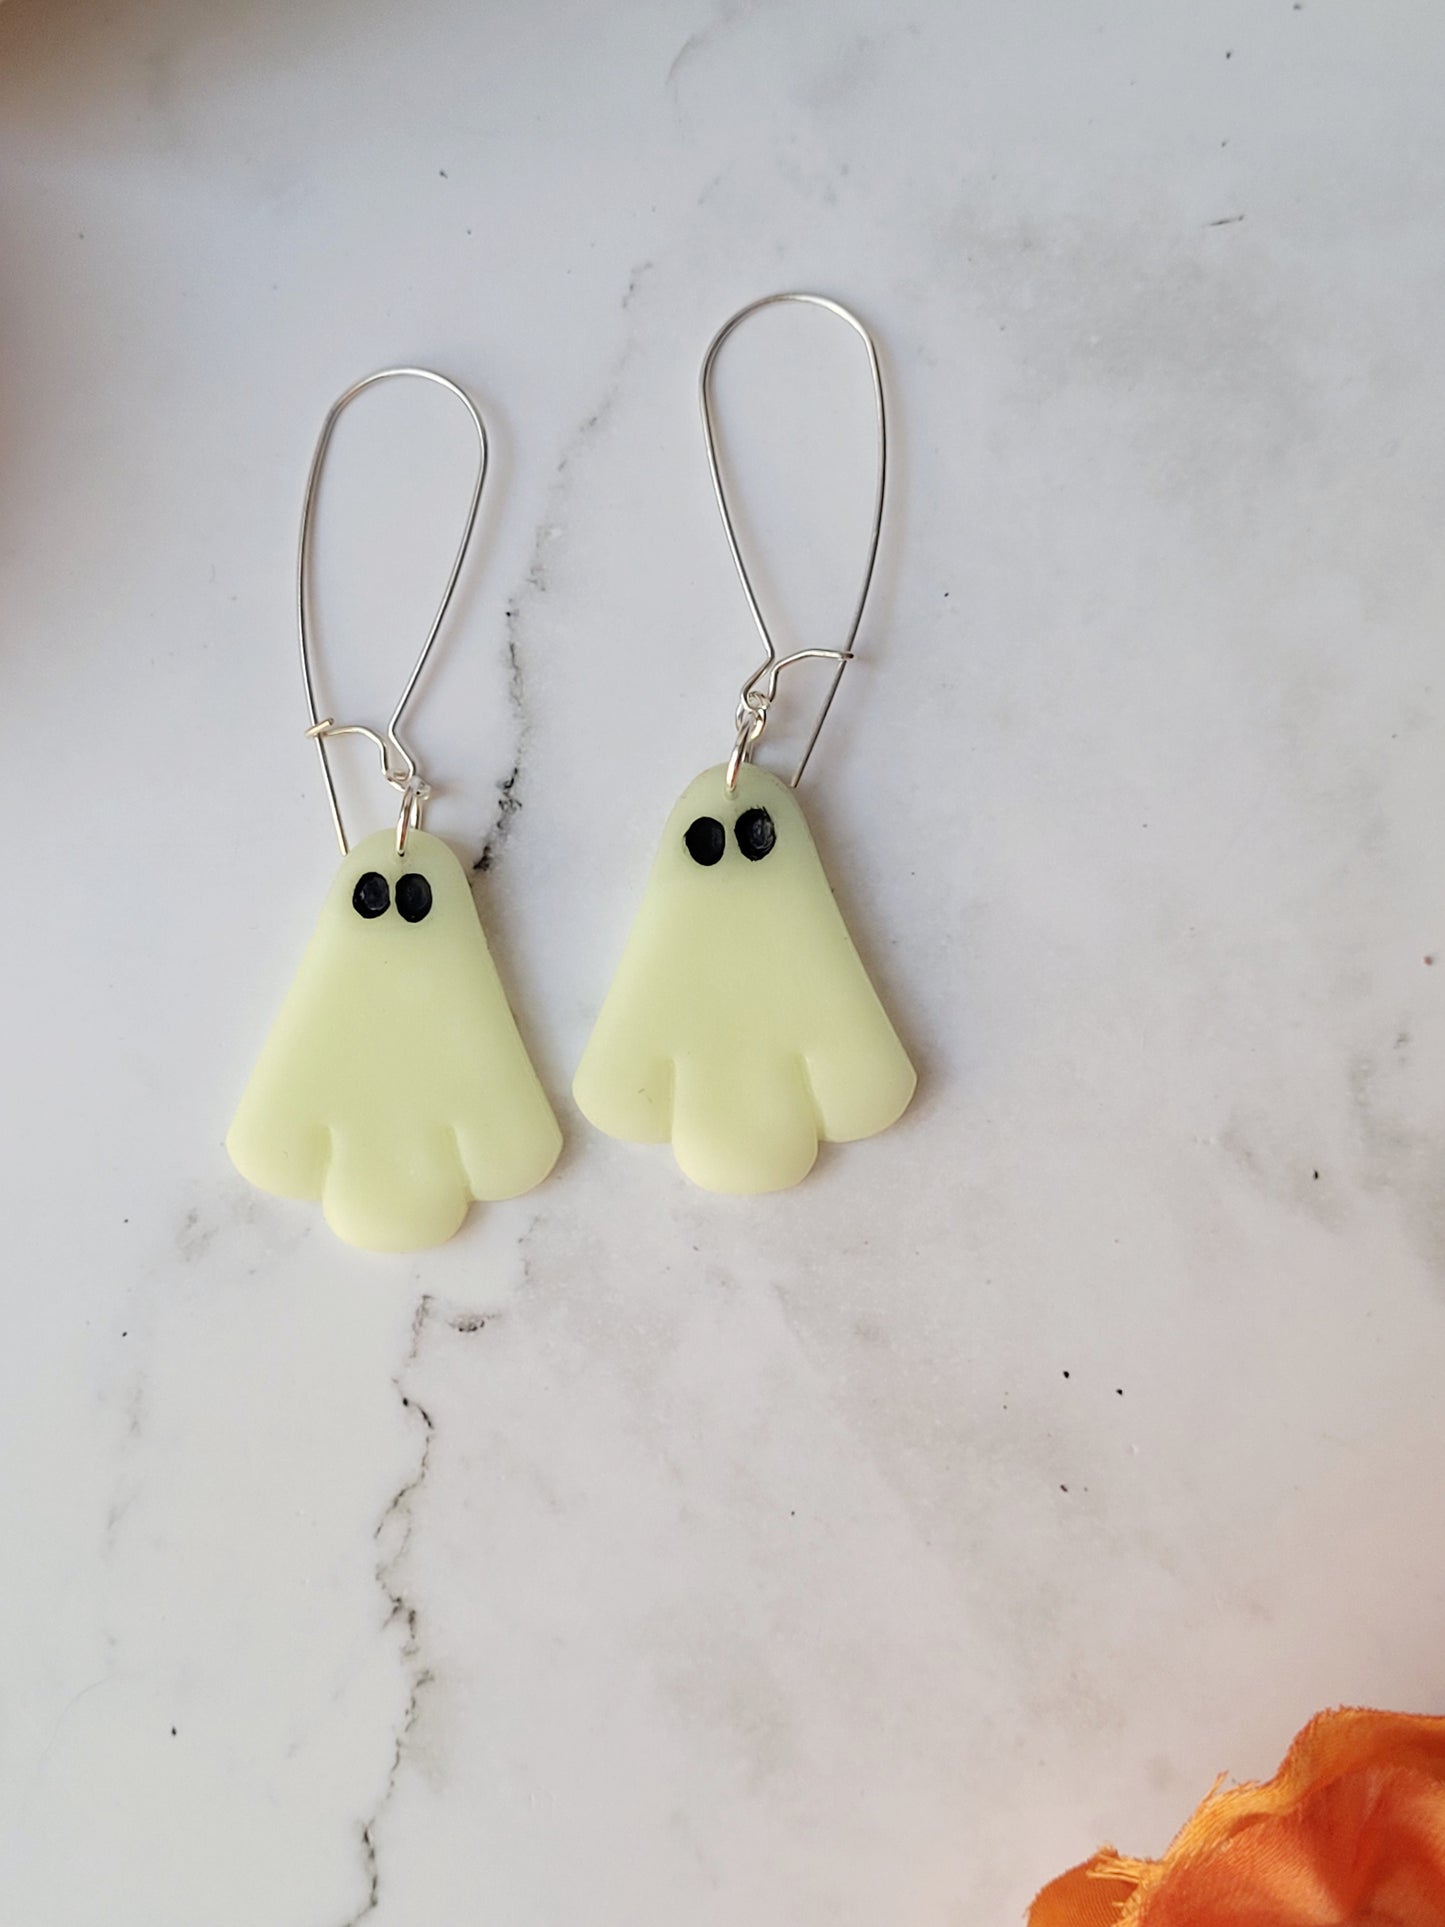 close up of glow in the dark ghost earrings on a white marble background.